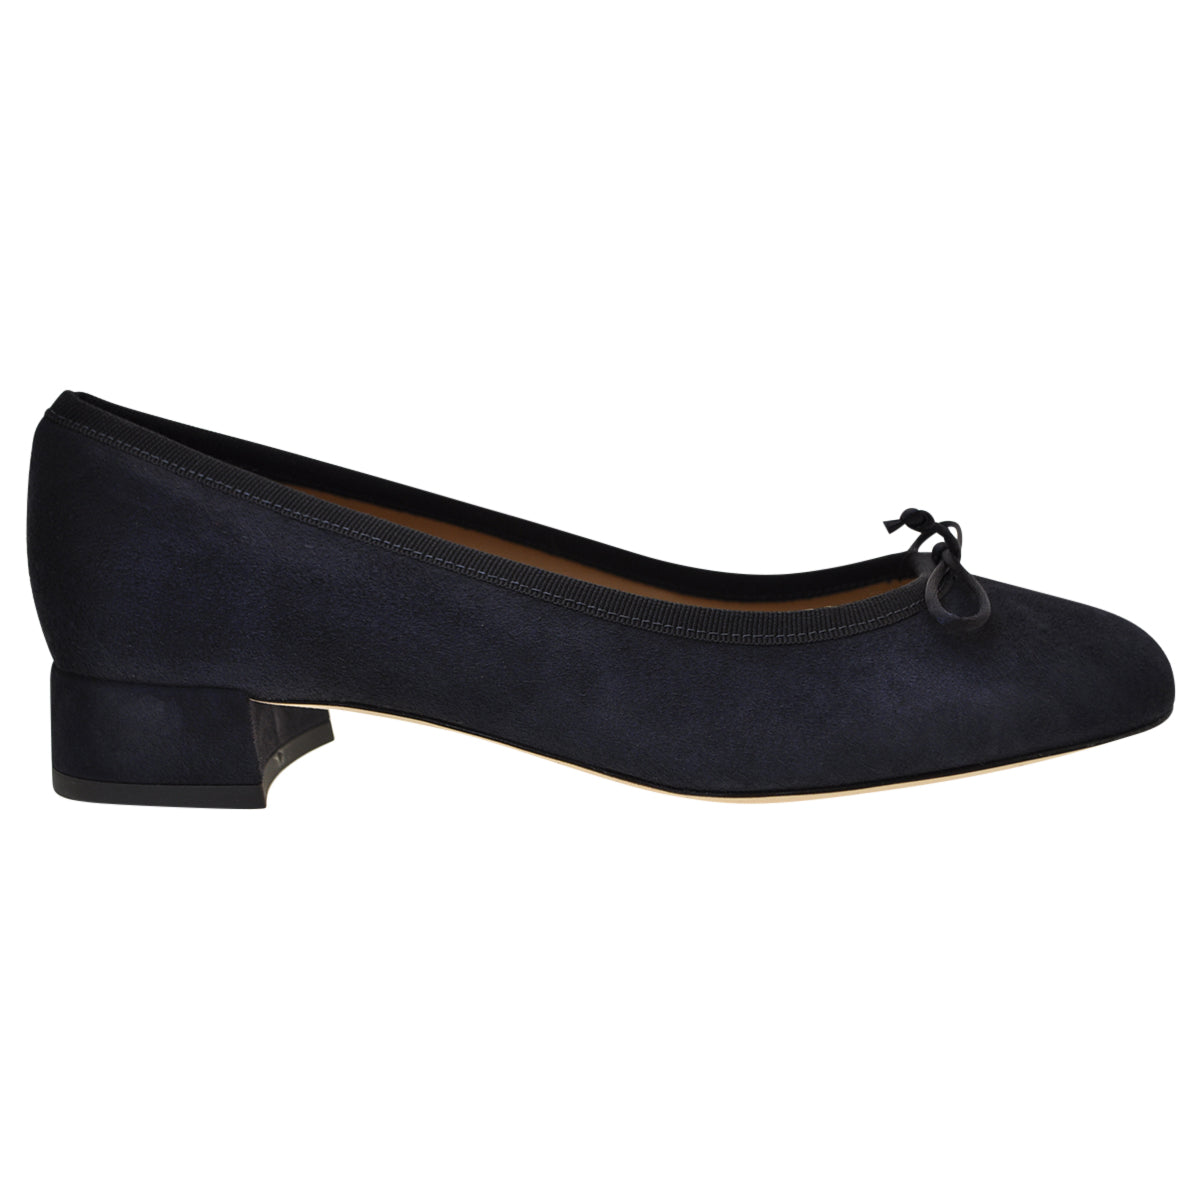 Navy ballet pumps in suede leather